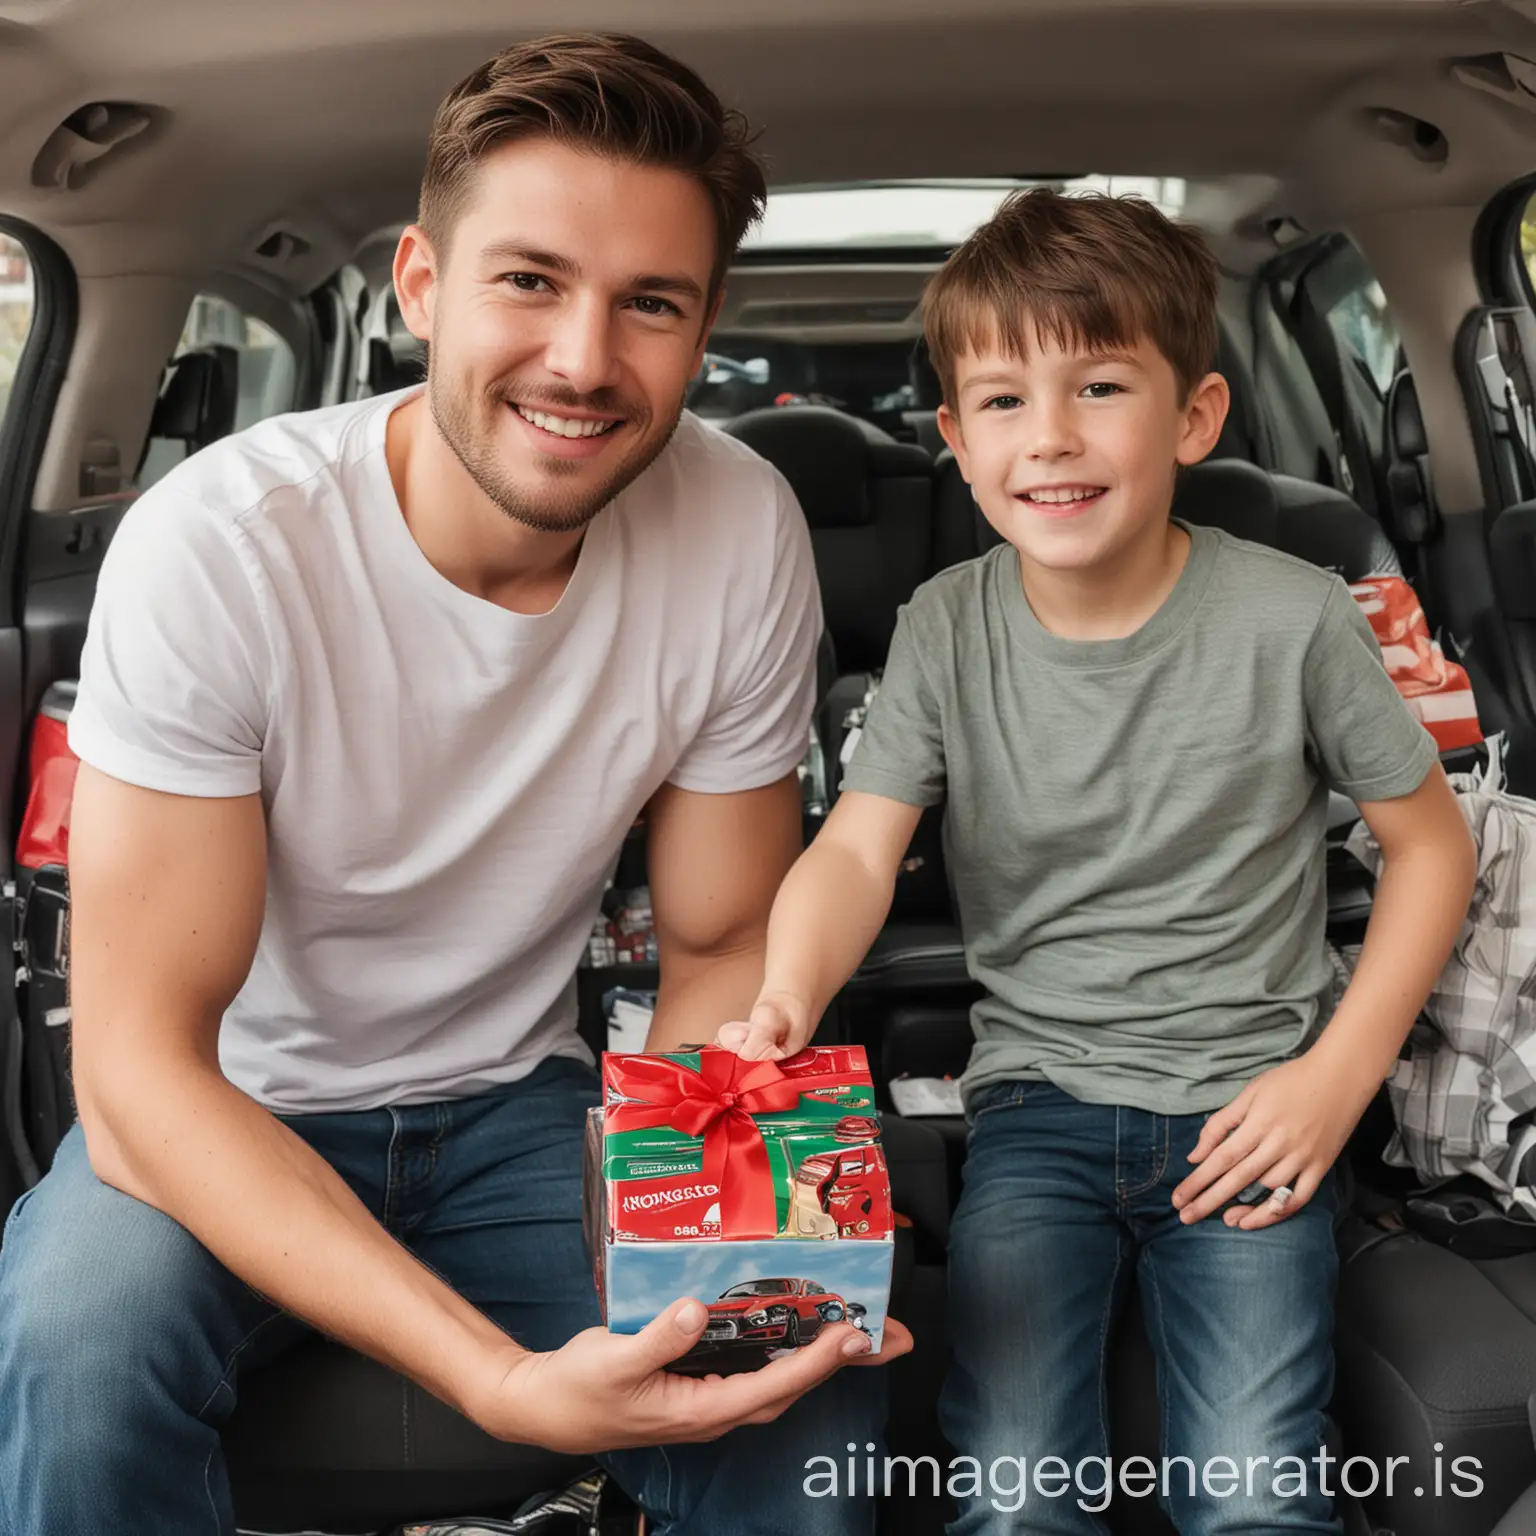 Smaller car gifts on son